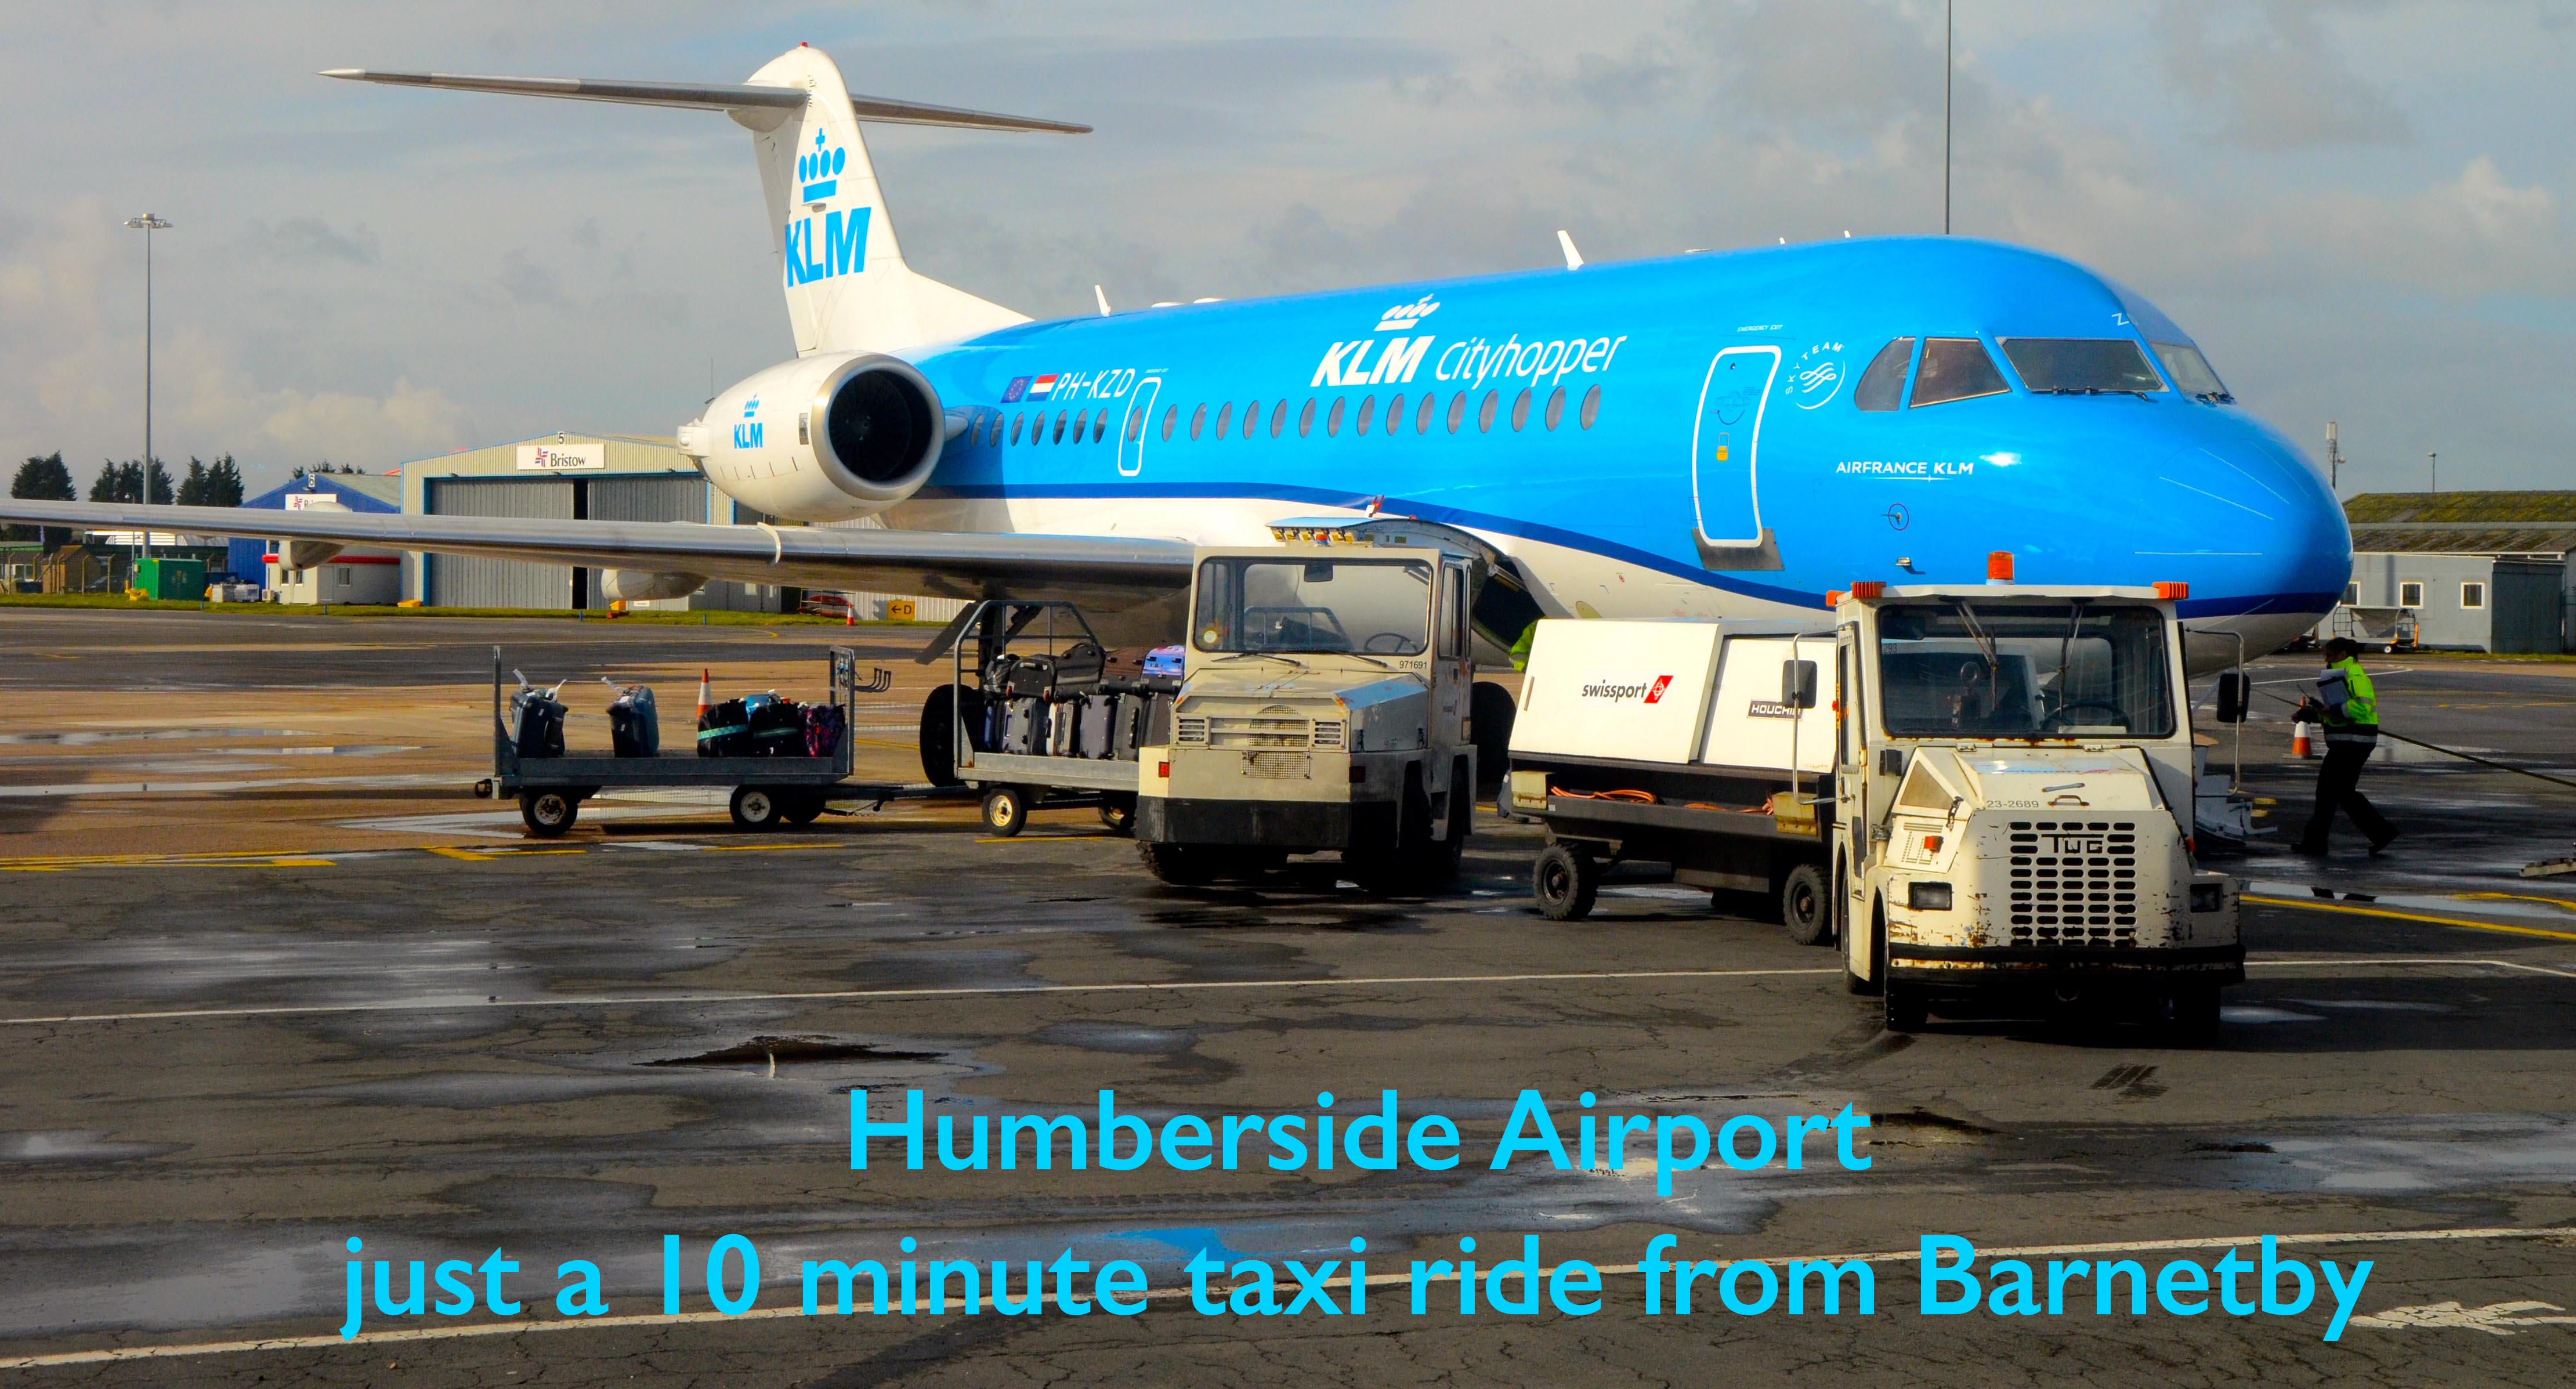 Humberside airport just 10 minites taxi ride from barnetby station